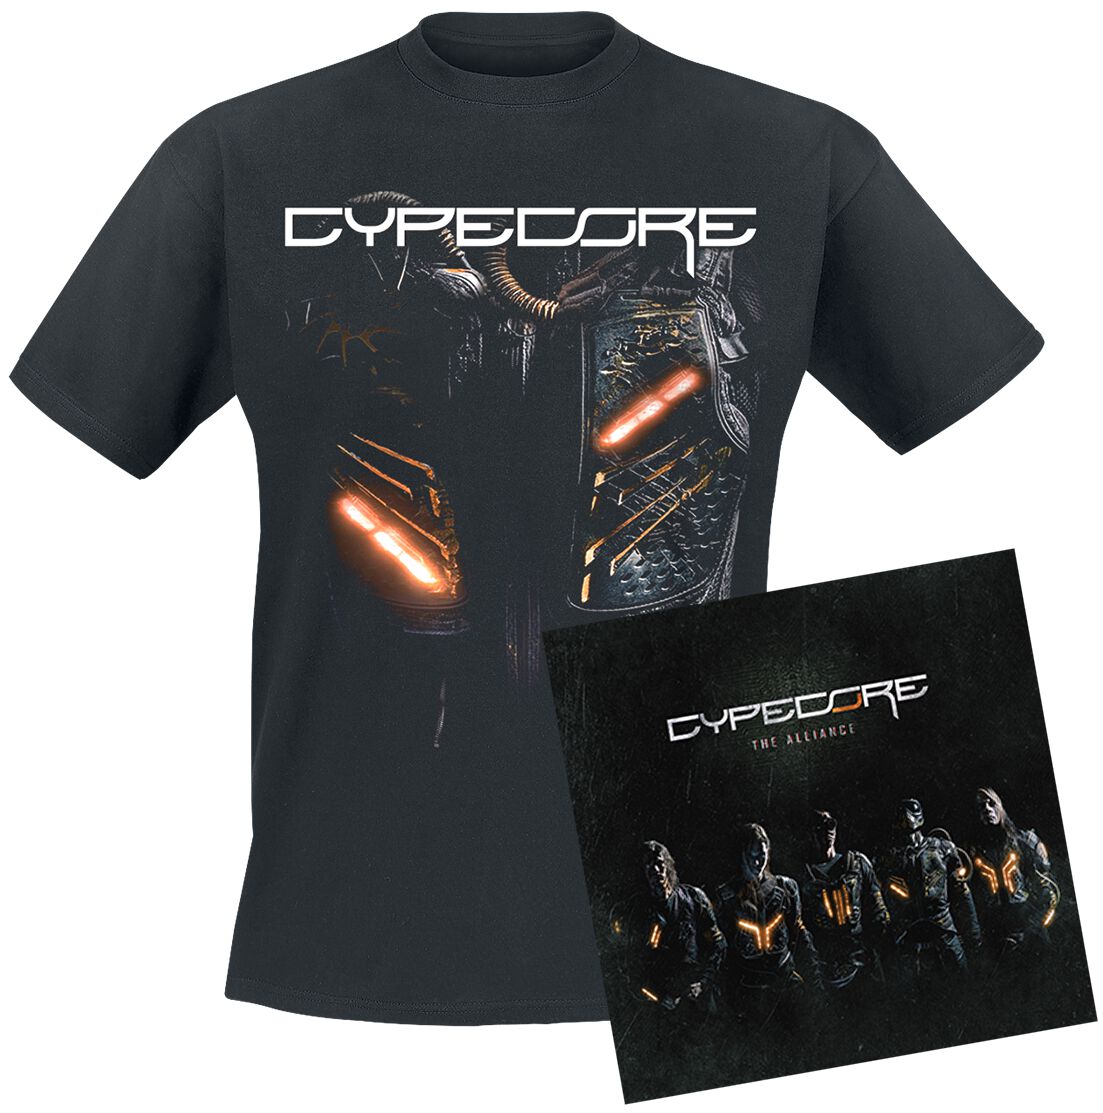 Image of Cypecore The alliance CD & T-Shirt Standard